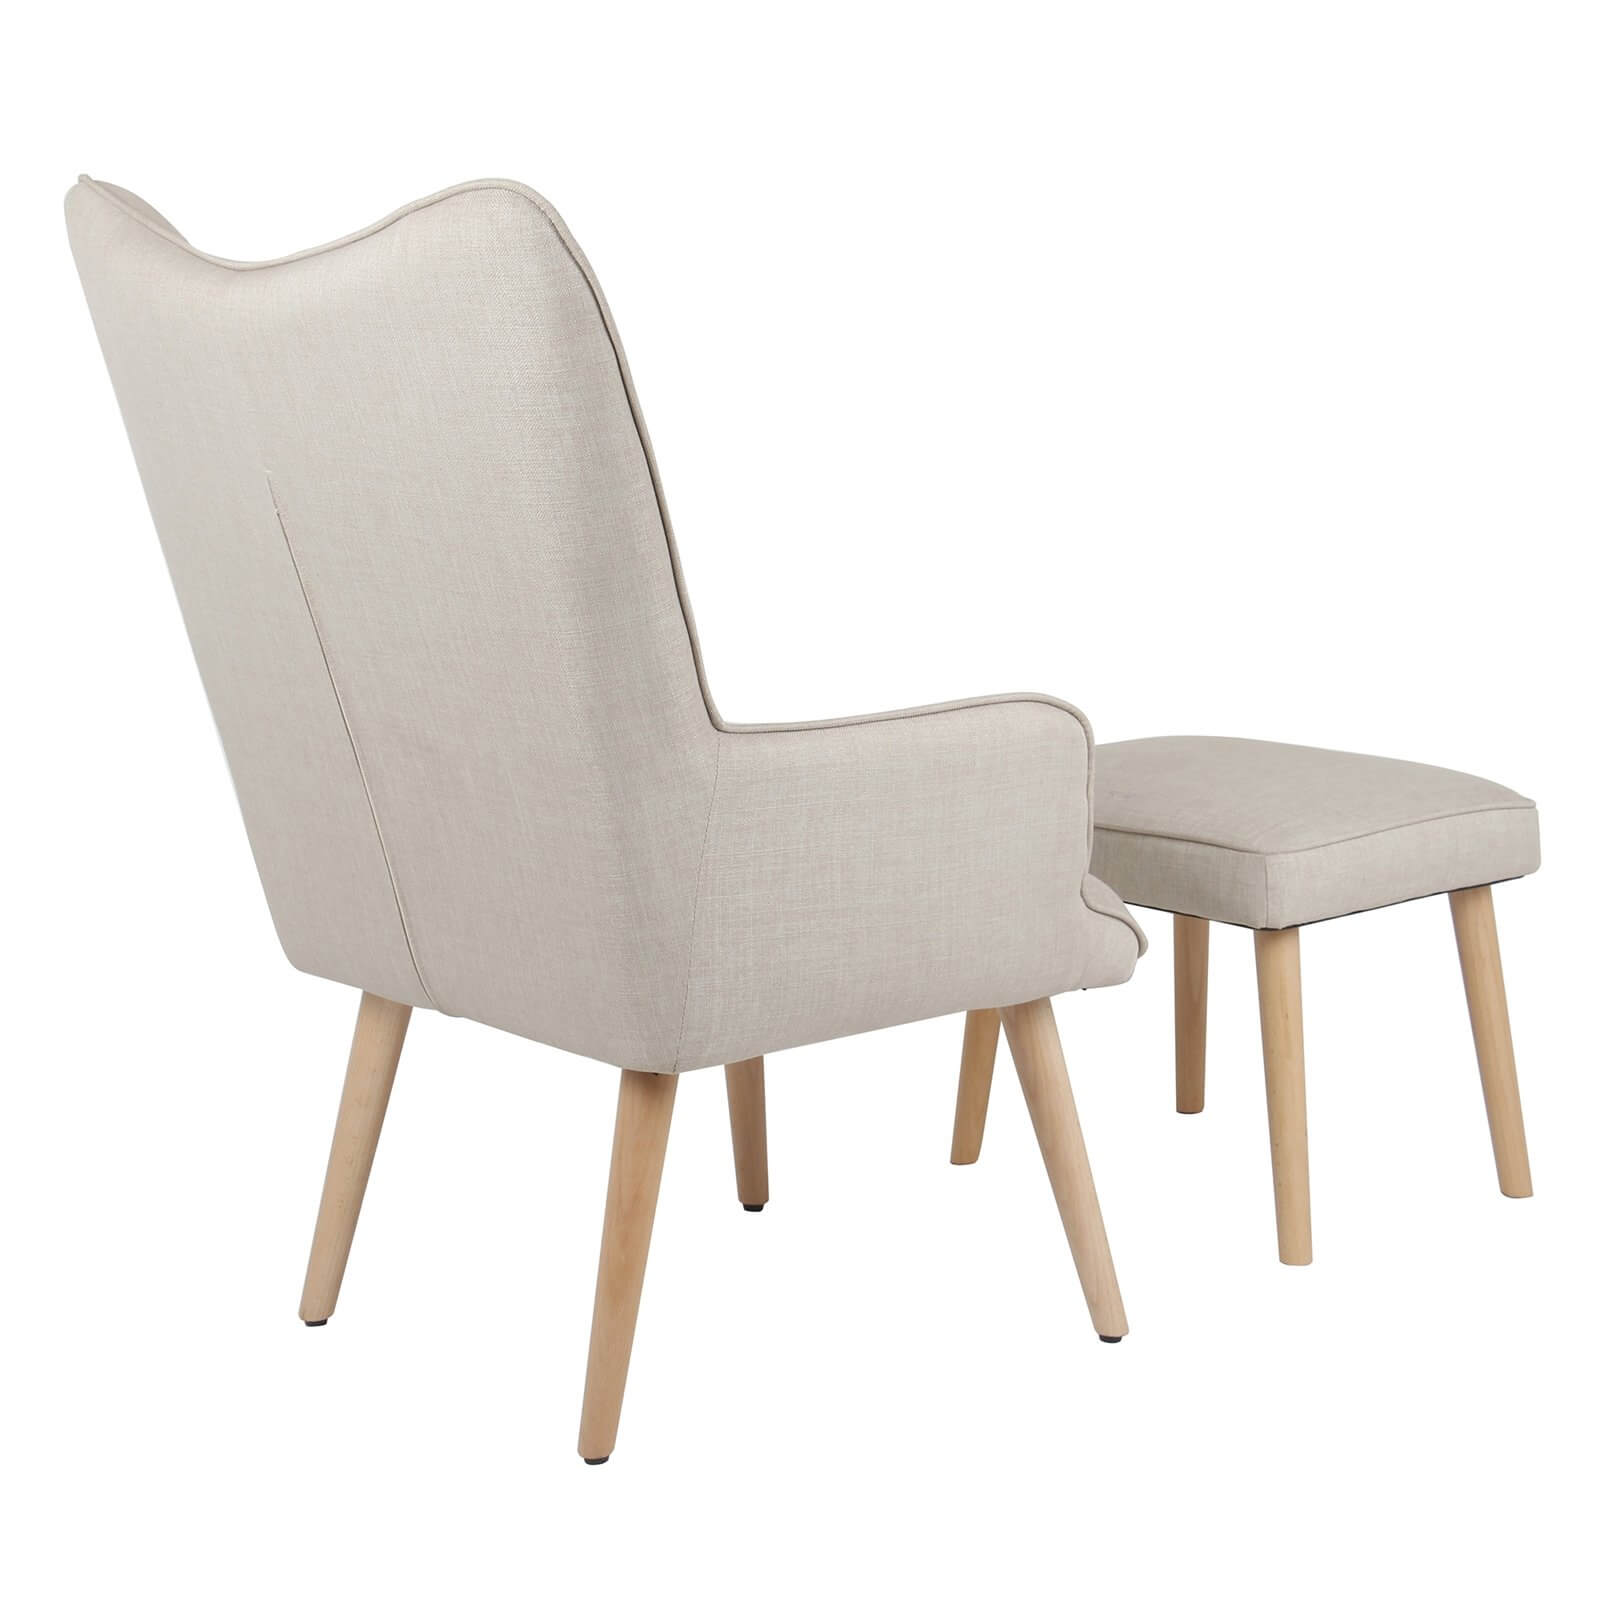 Leon Chair and Footstool - Natural